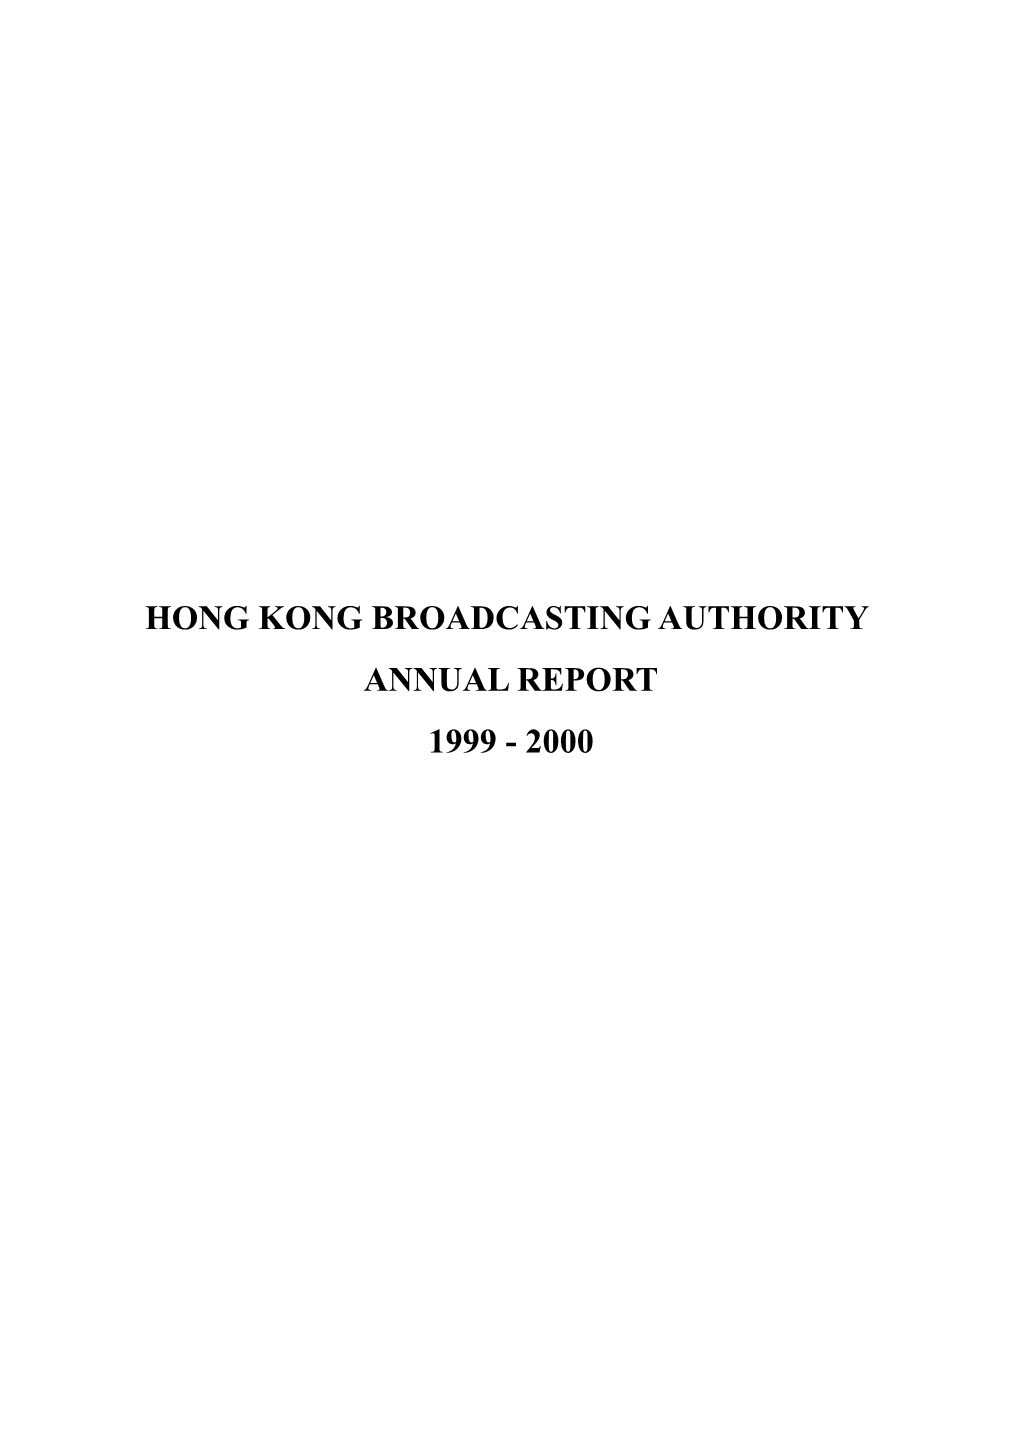 Hong Kong Broadcasting Authority